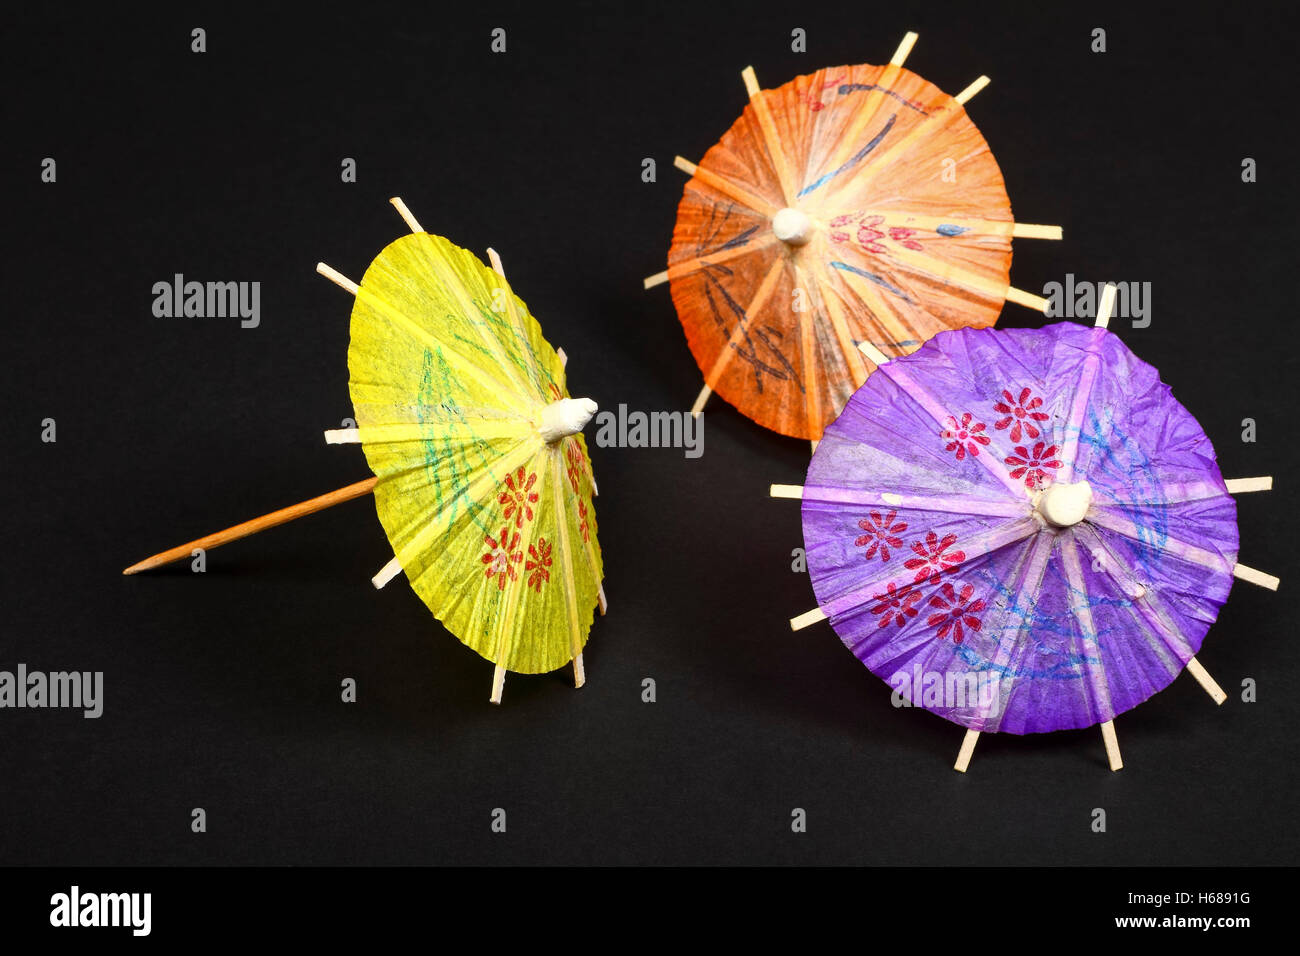 Cocktail umbrellas isolated on a black background Stock Photo